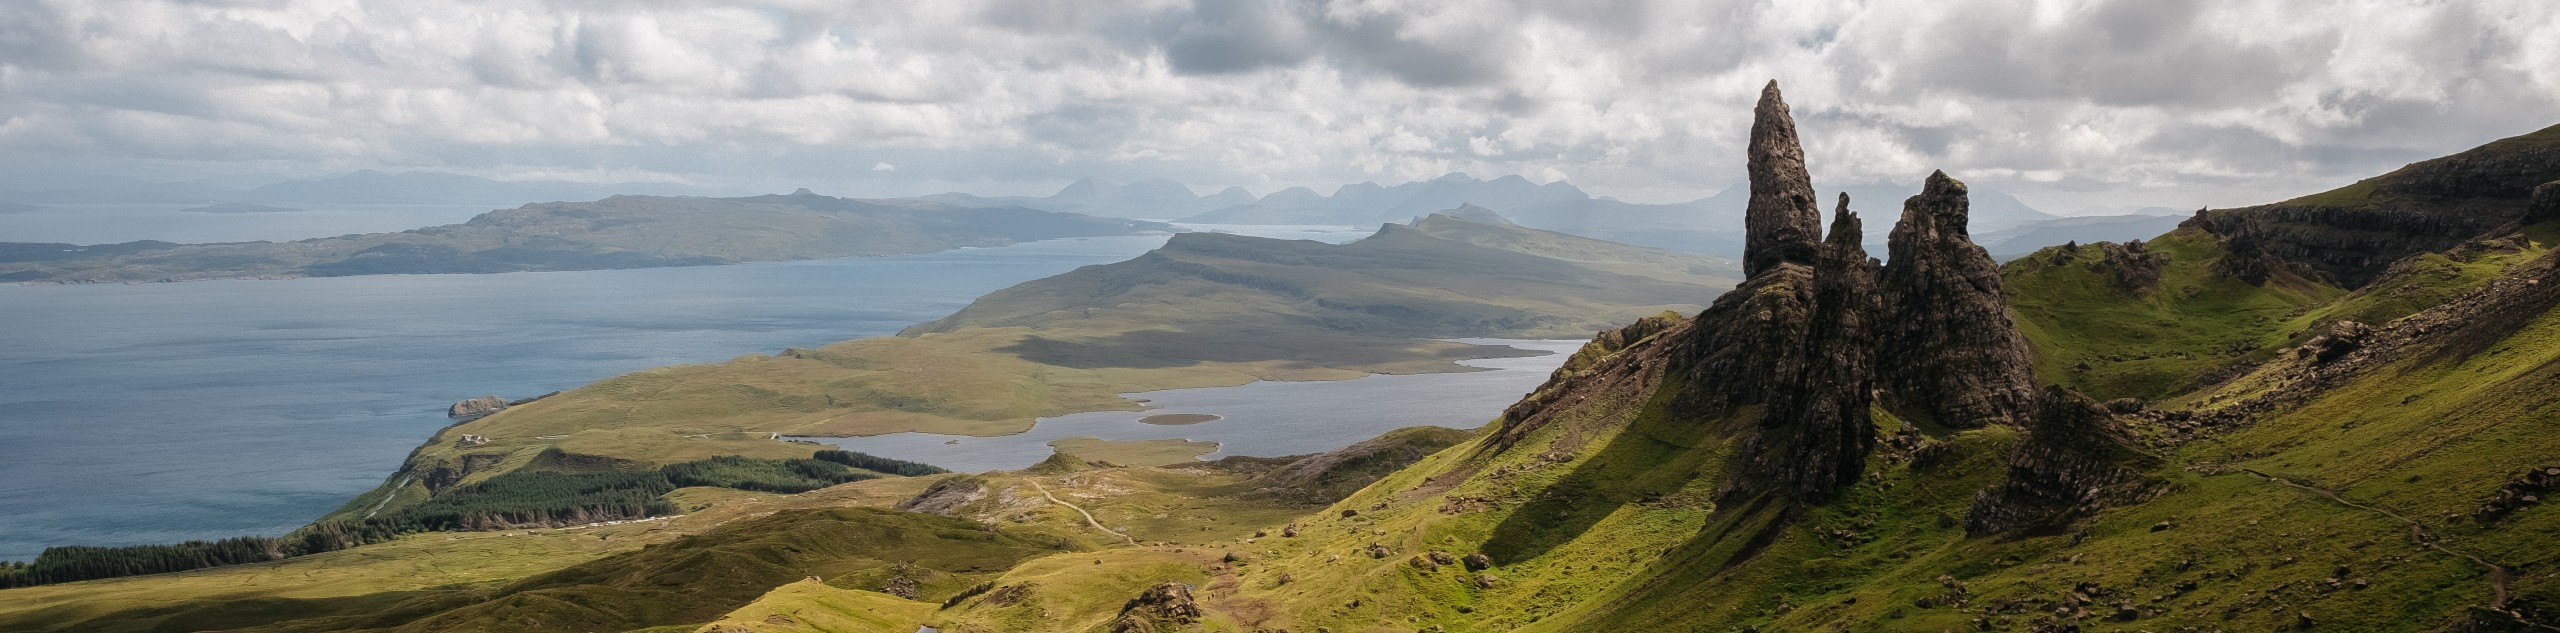 Needle Rock, The Storr and The Old Man of Storr Circular Walk